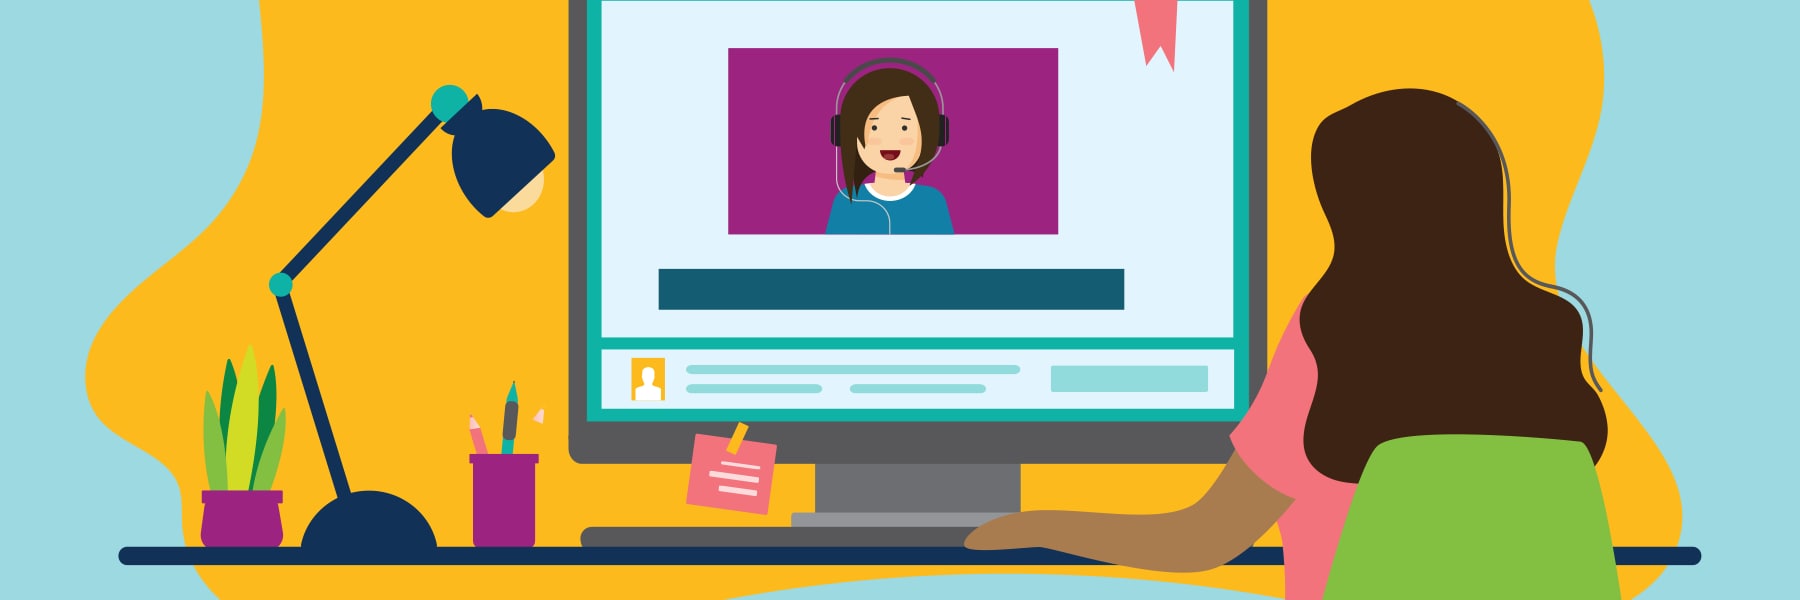 Illustration of a woman sitting at a computer engaged with occupational therapist via video chat